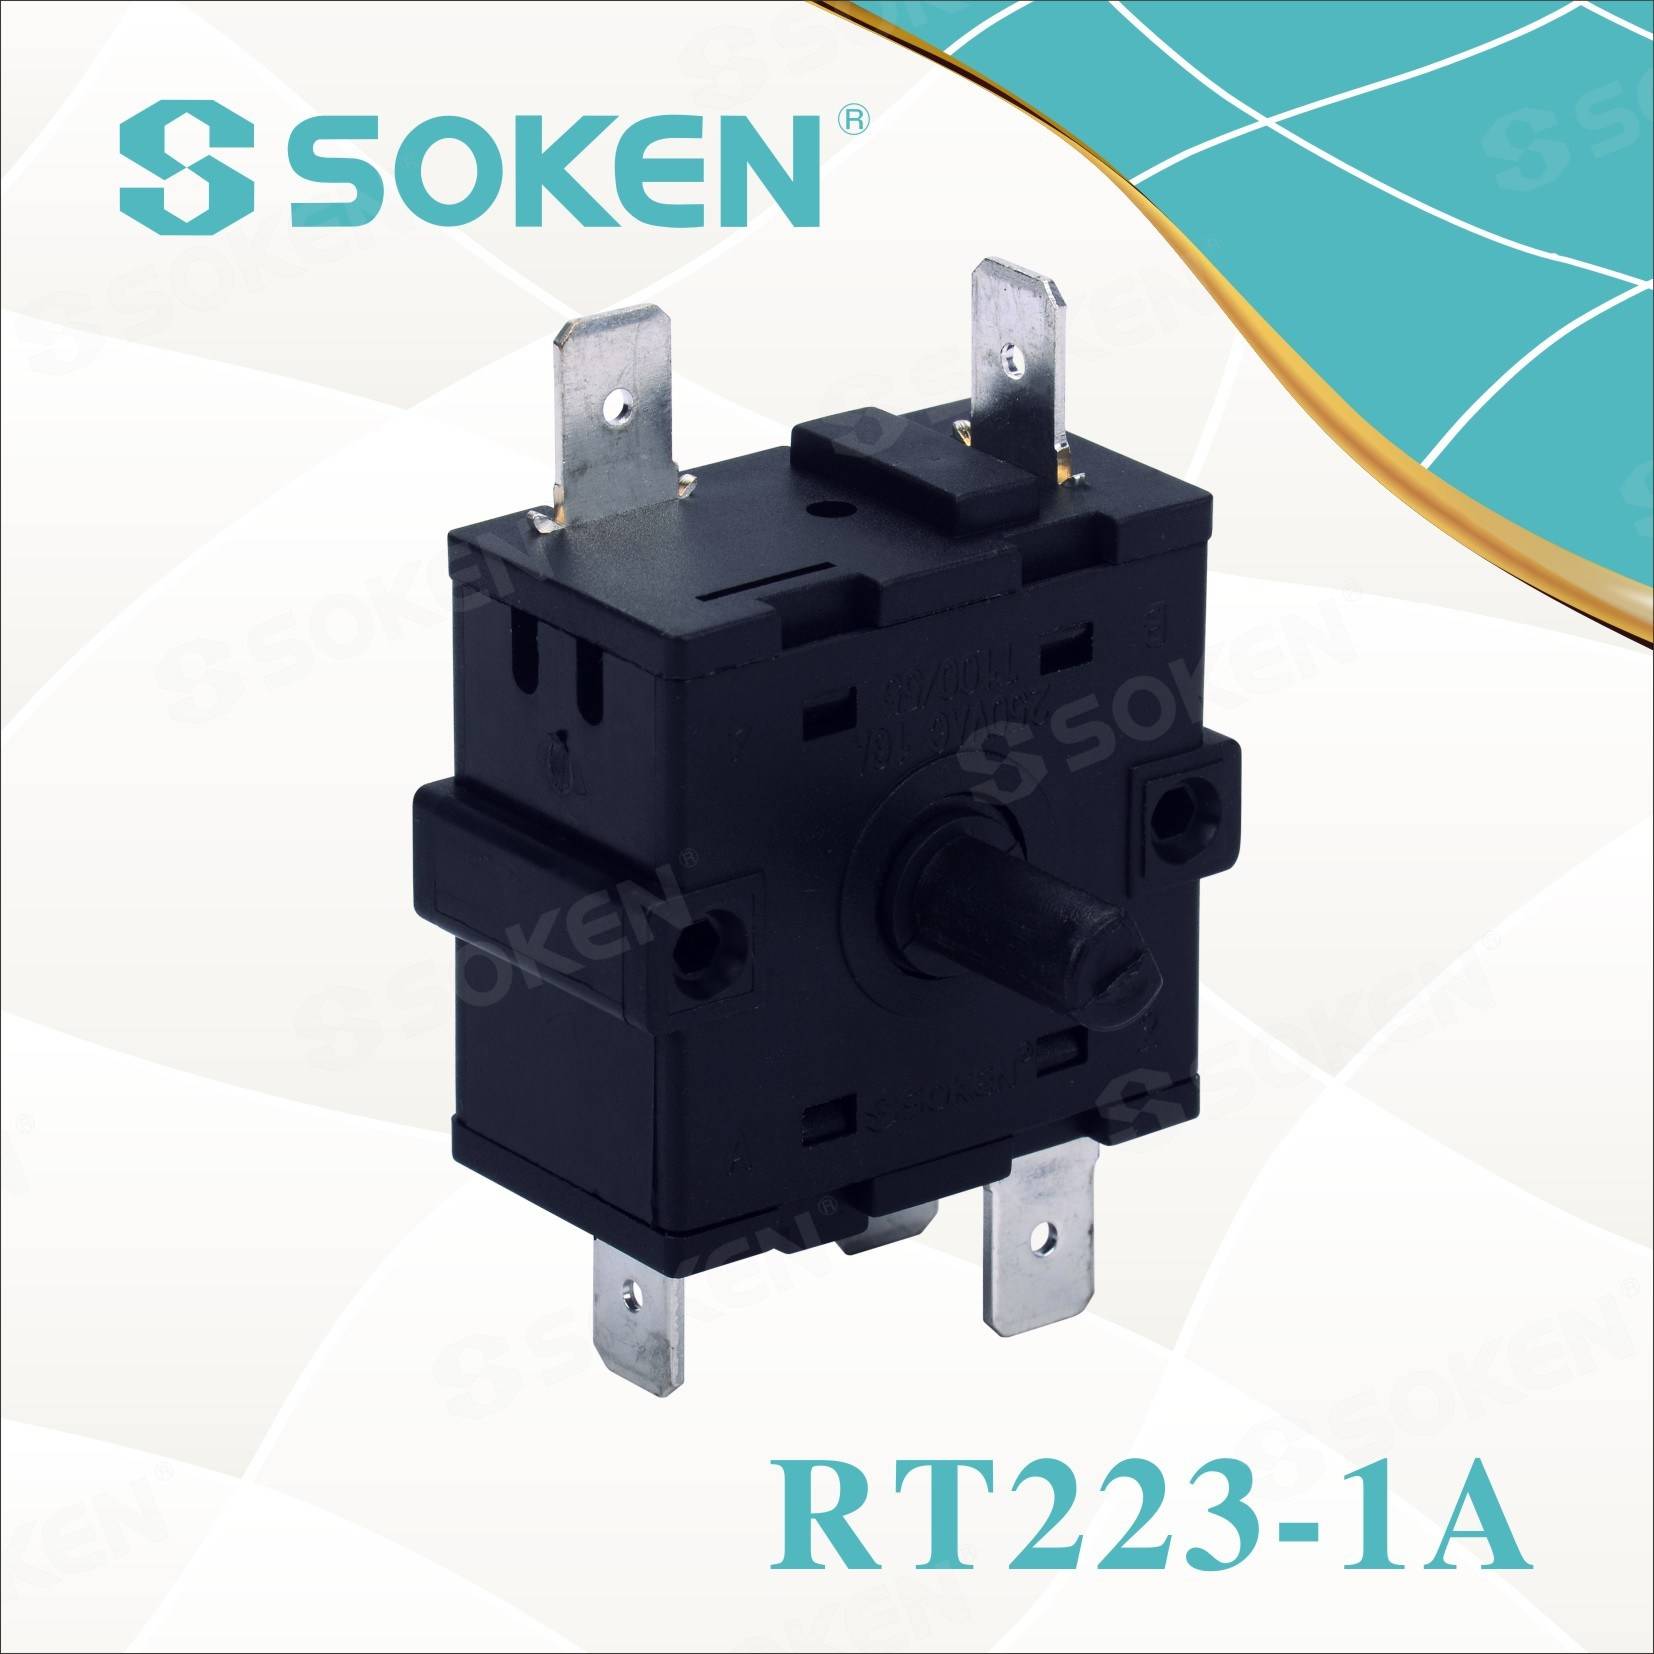 Wholesale OEM/ODM 3pin Boat Switch -
 Soken 4 Position Rotary Switch – Master Soken Electrical